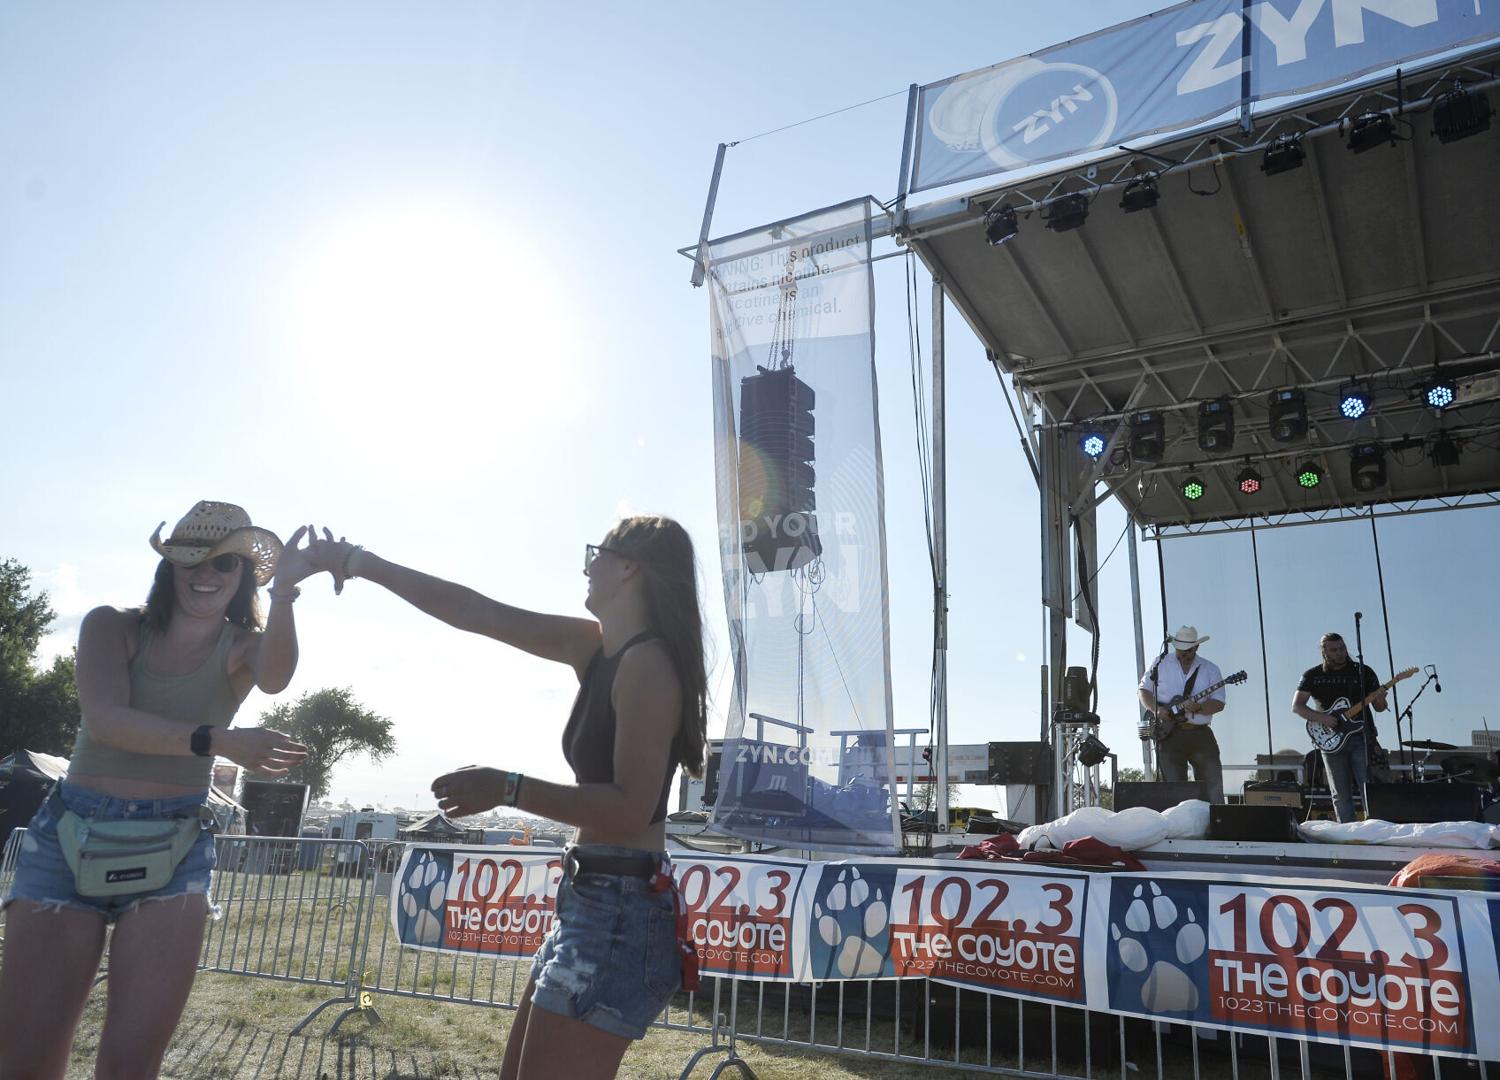 Country Thunder music festival kicks off smoothly in Randall